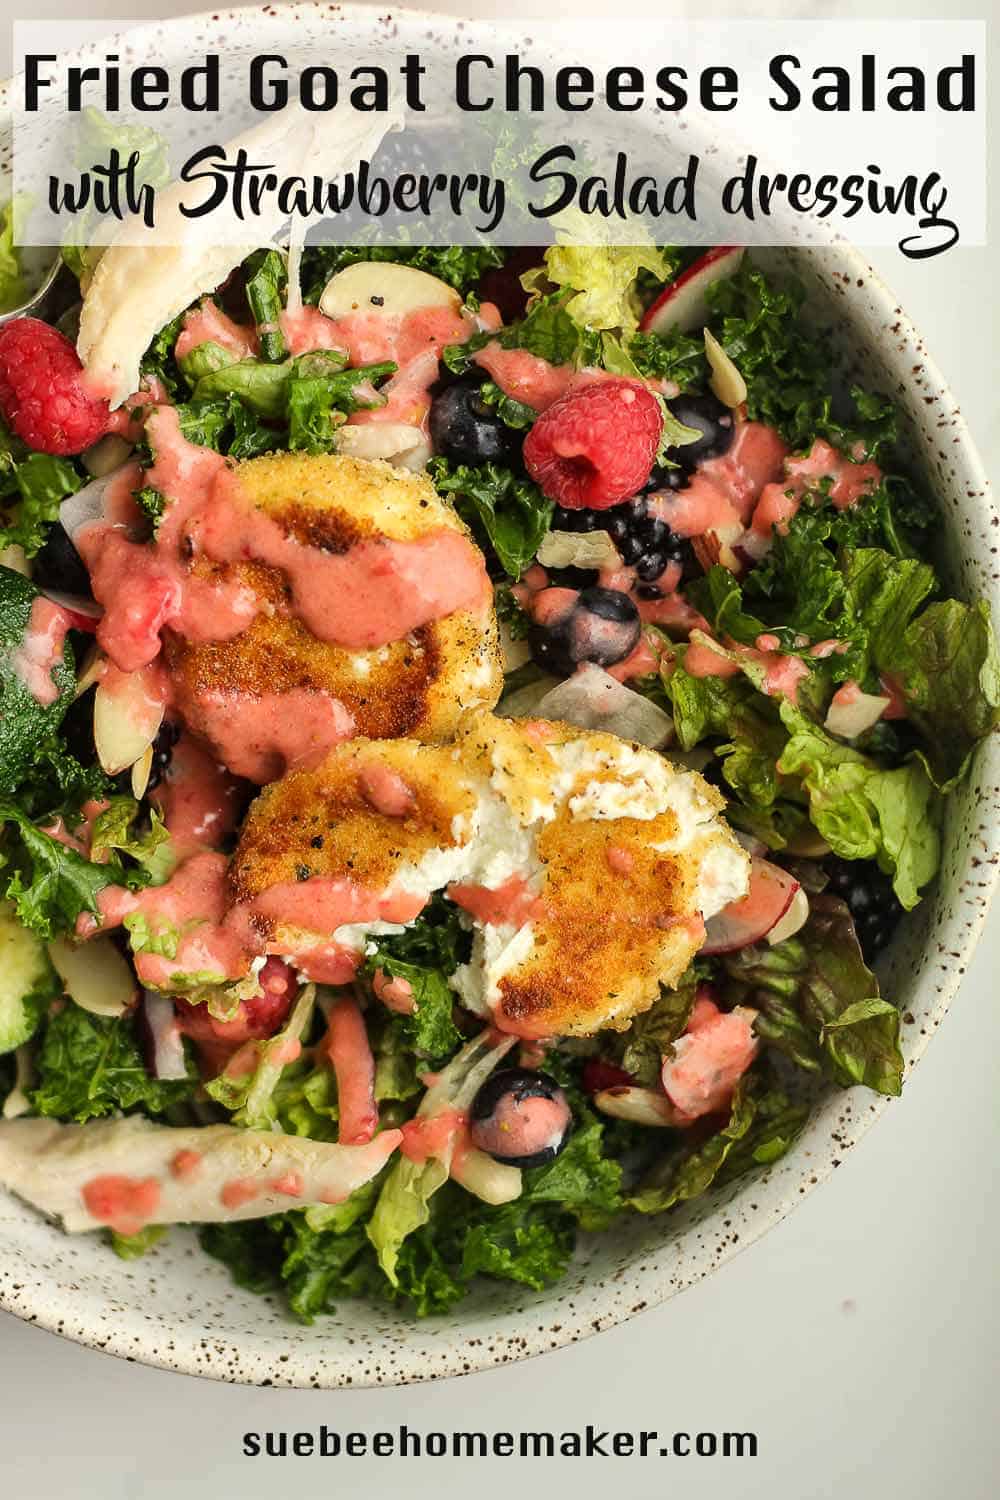 A bowl of fried goat cheese salad with strawberry dressing on top.